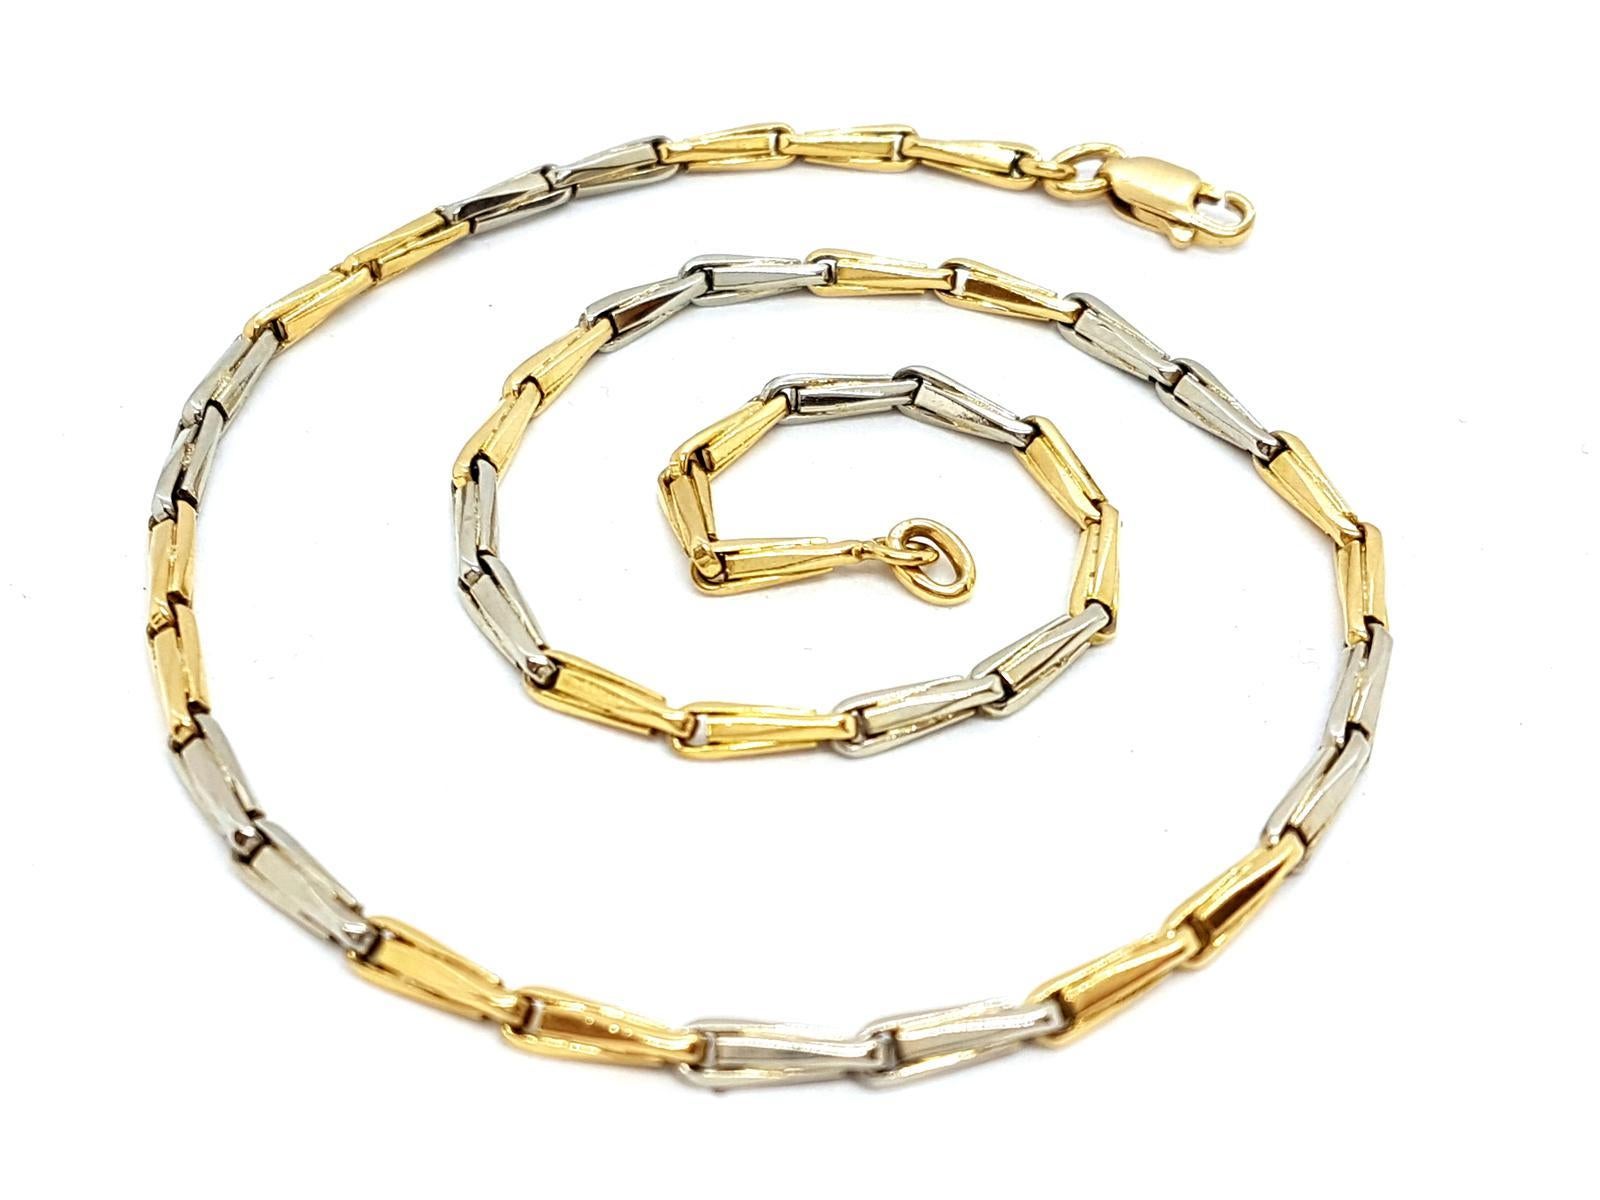 bicolor old string in yellow gold and white 750 mils (18 carats). links form of ears. choker. length: 36 cm. width: 2.7 mm. total weight: 16.68 g. punched. excellent condition
